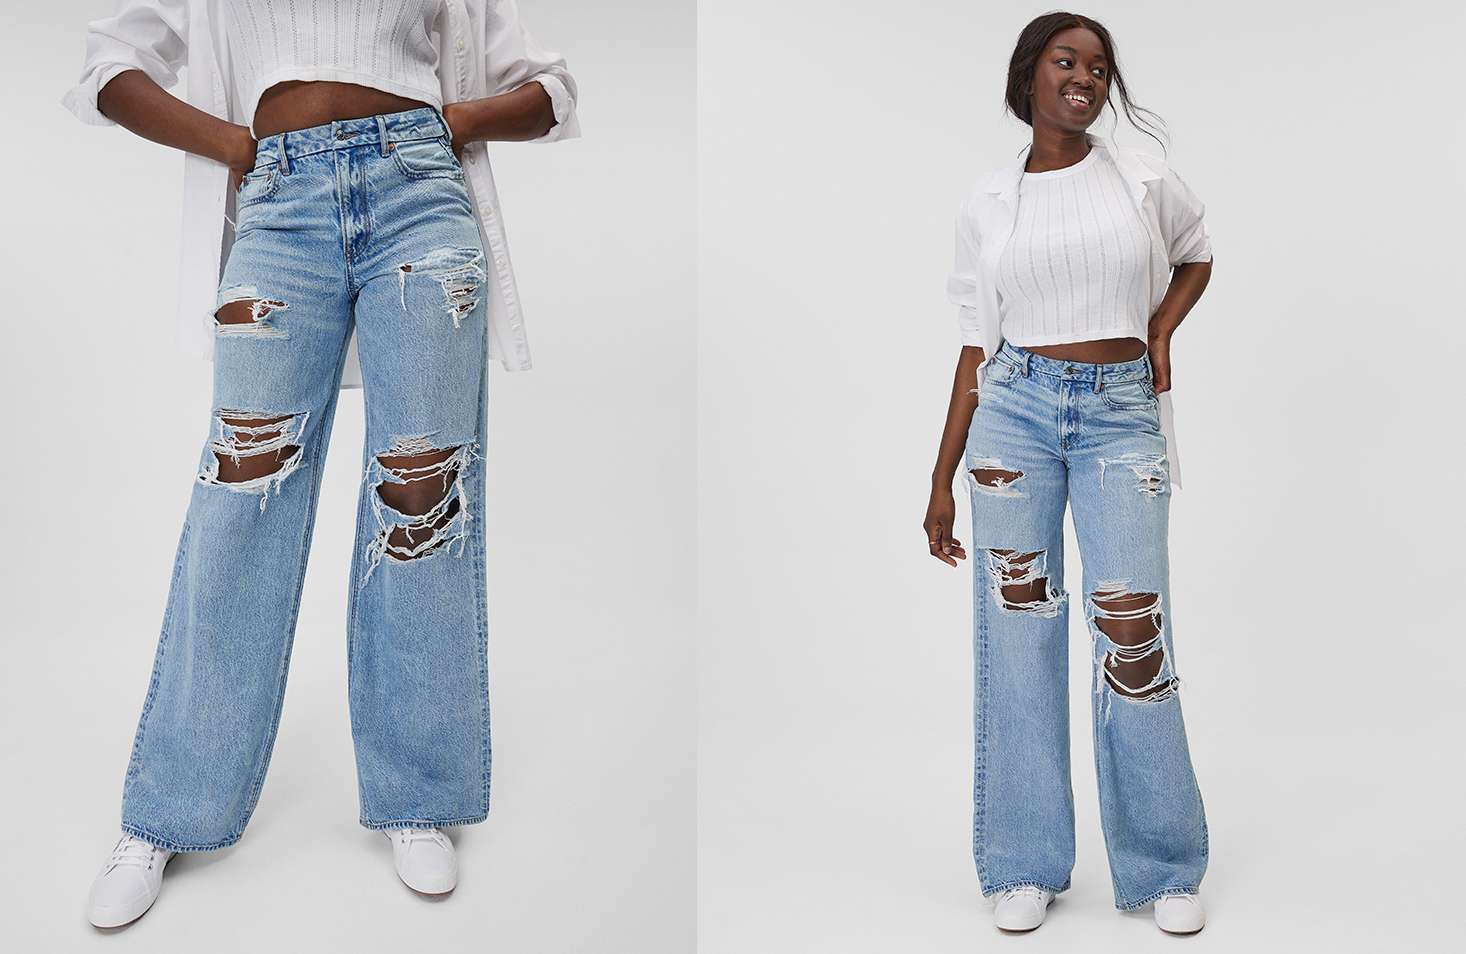 Mari is 5'10" and wearing the Curvy Super High-Waisted Baggy Wide-Leg Jean in a size 6 X-Long.